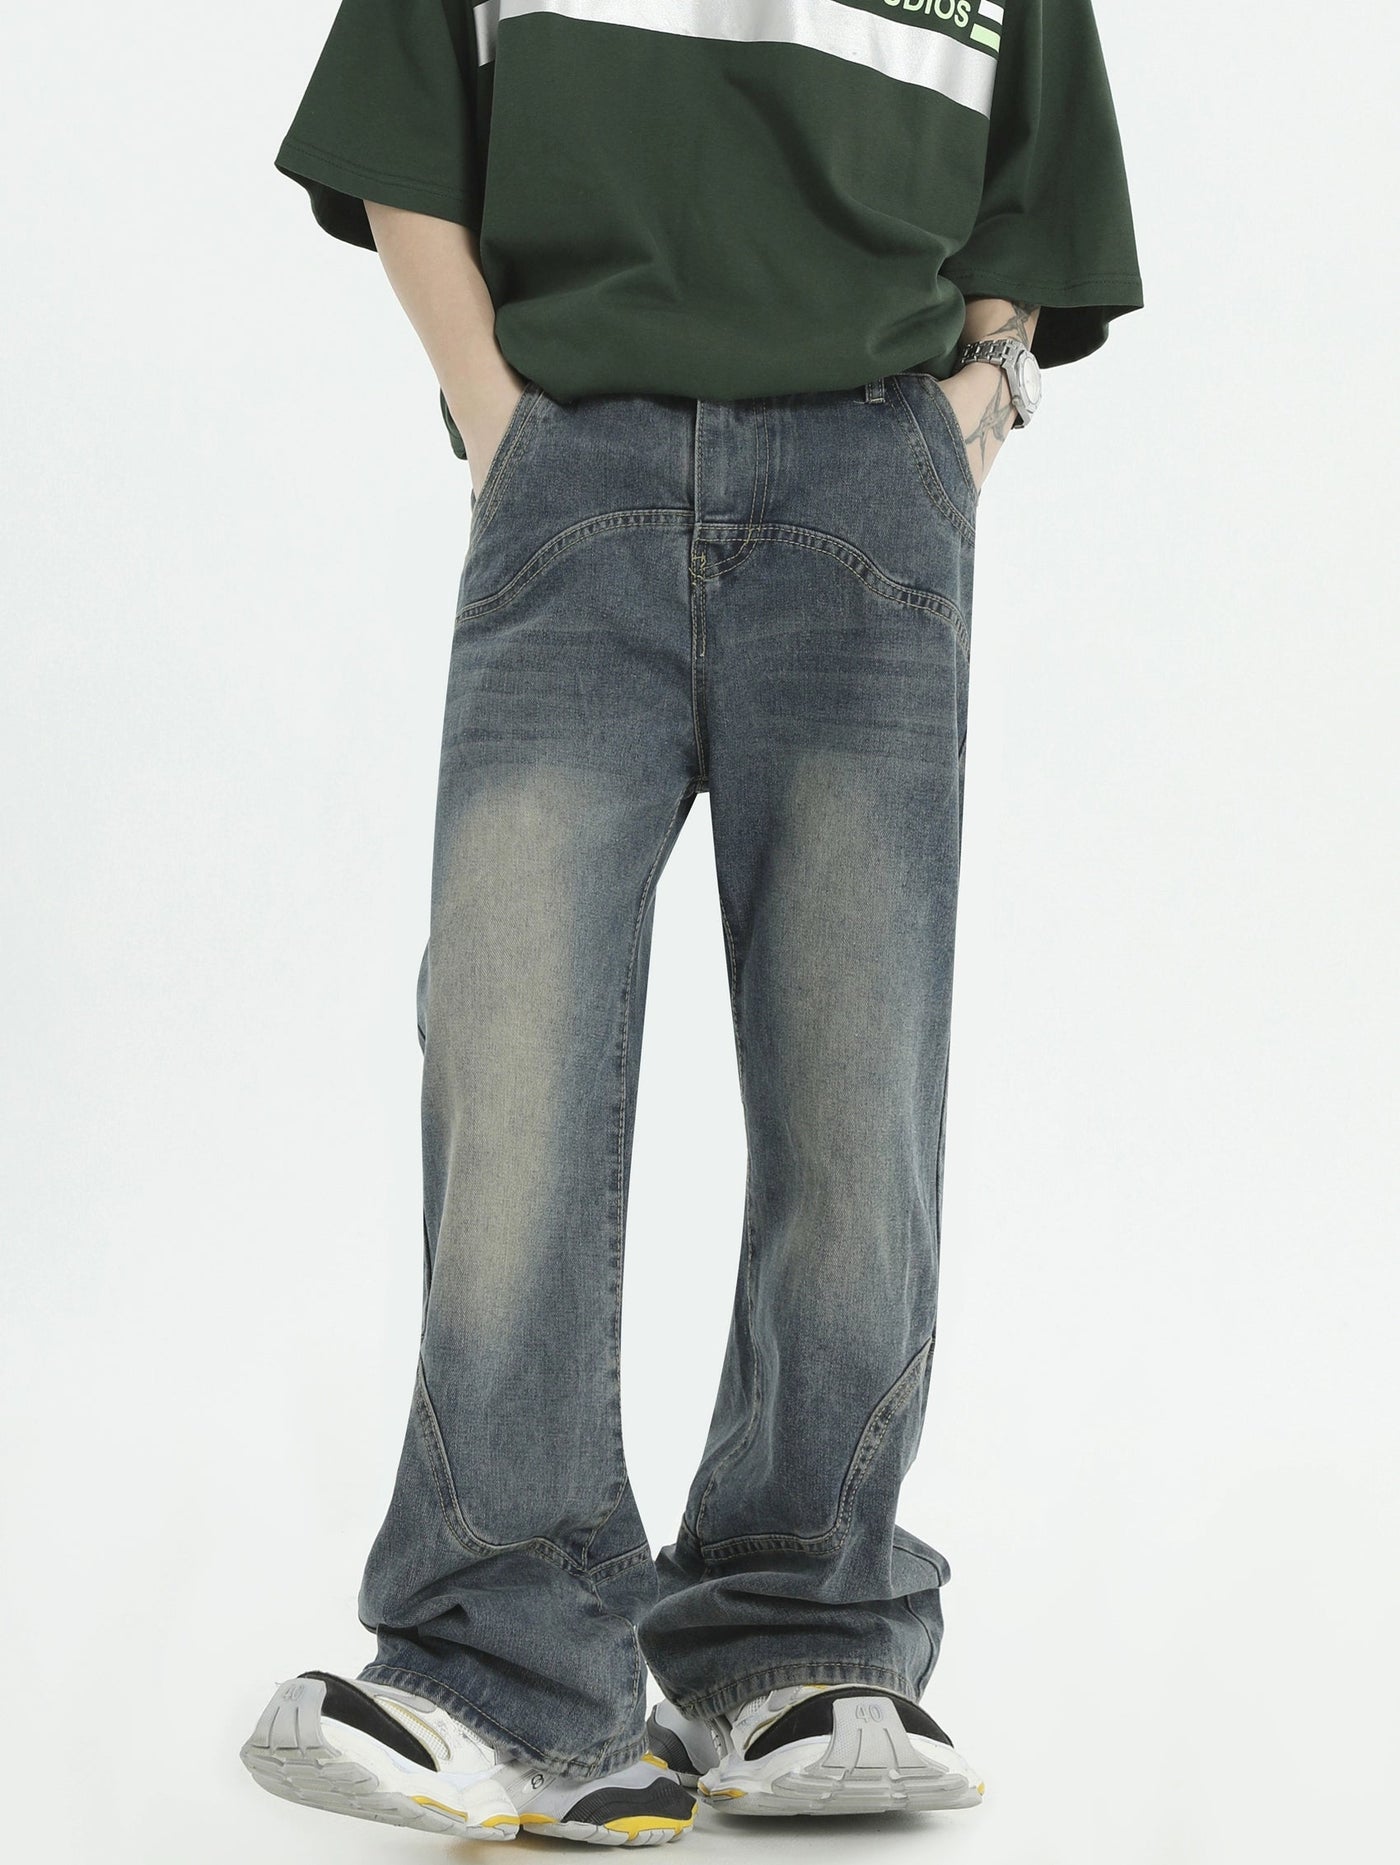 Faded Detail Washed Jeans Korean Street Fashion Jeans By INS Korea Shop Online at OH Vault